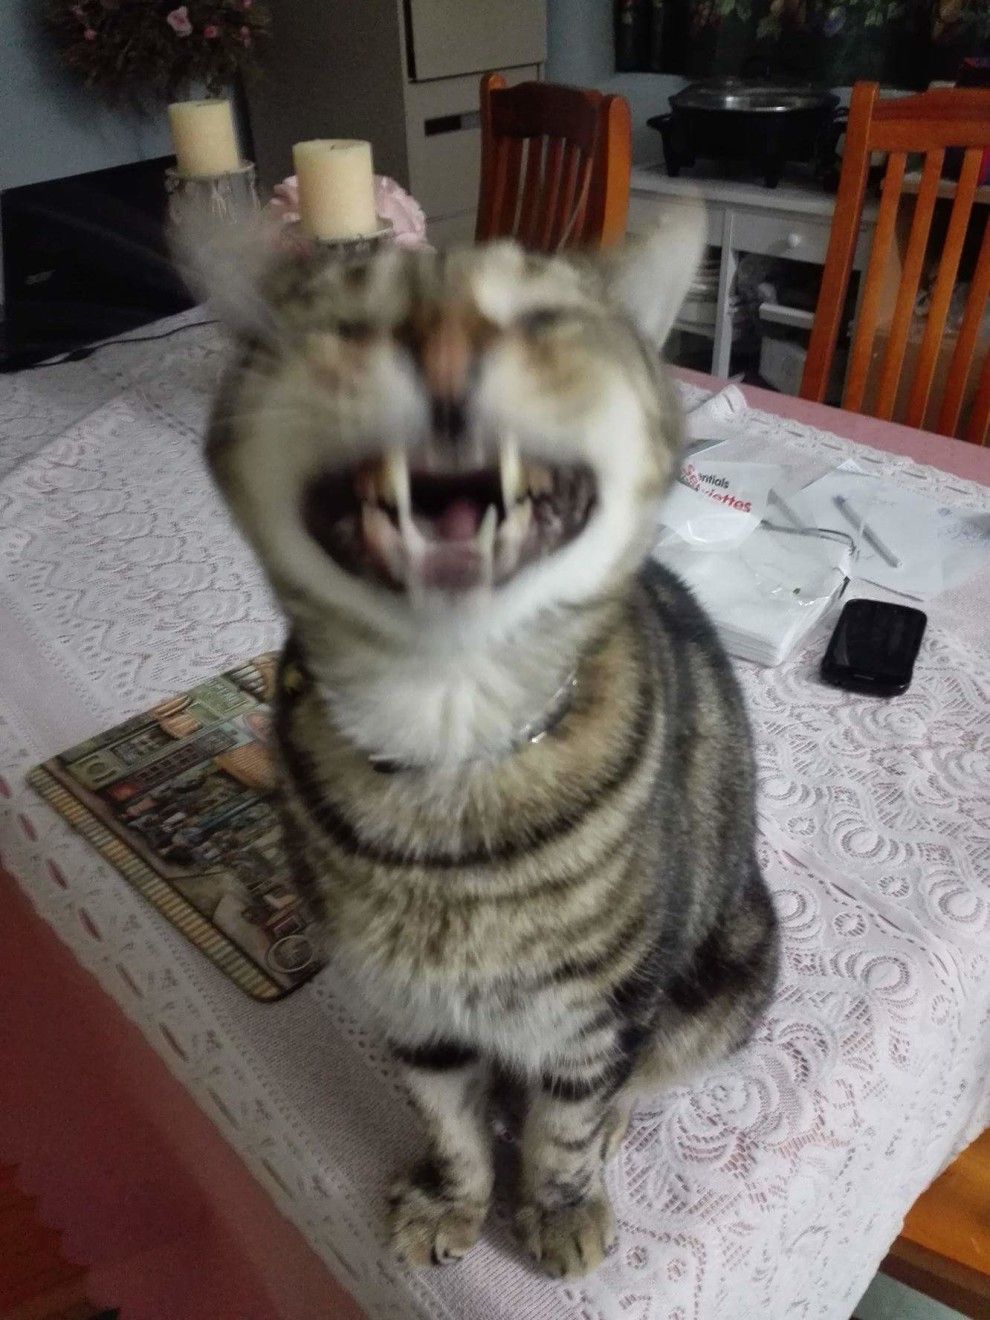 21 , Of Cats Sneezing That Will Make You Laugh